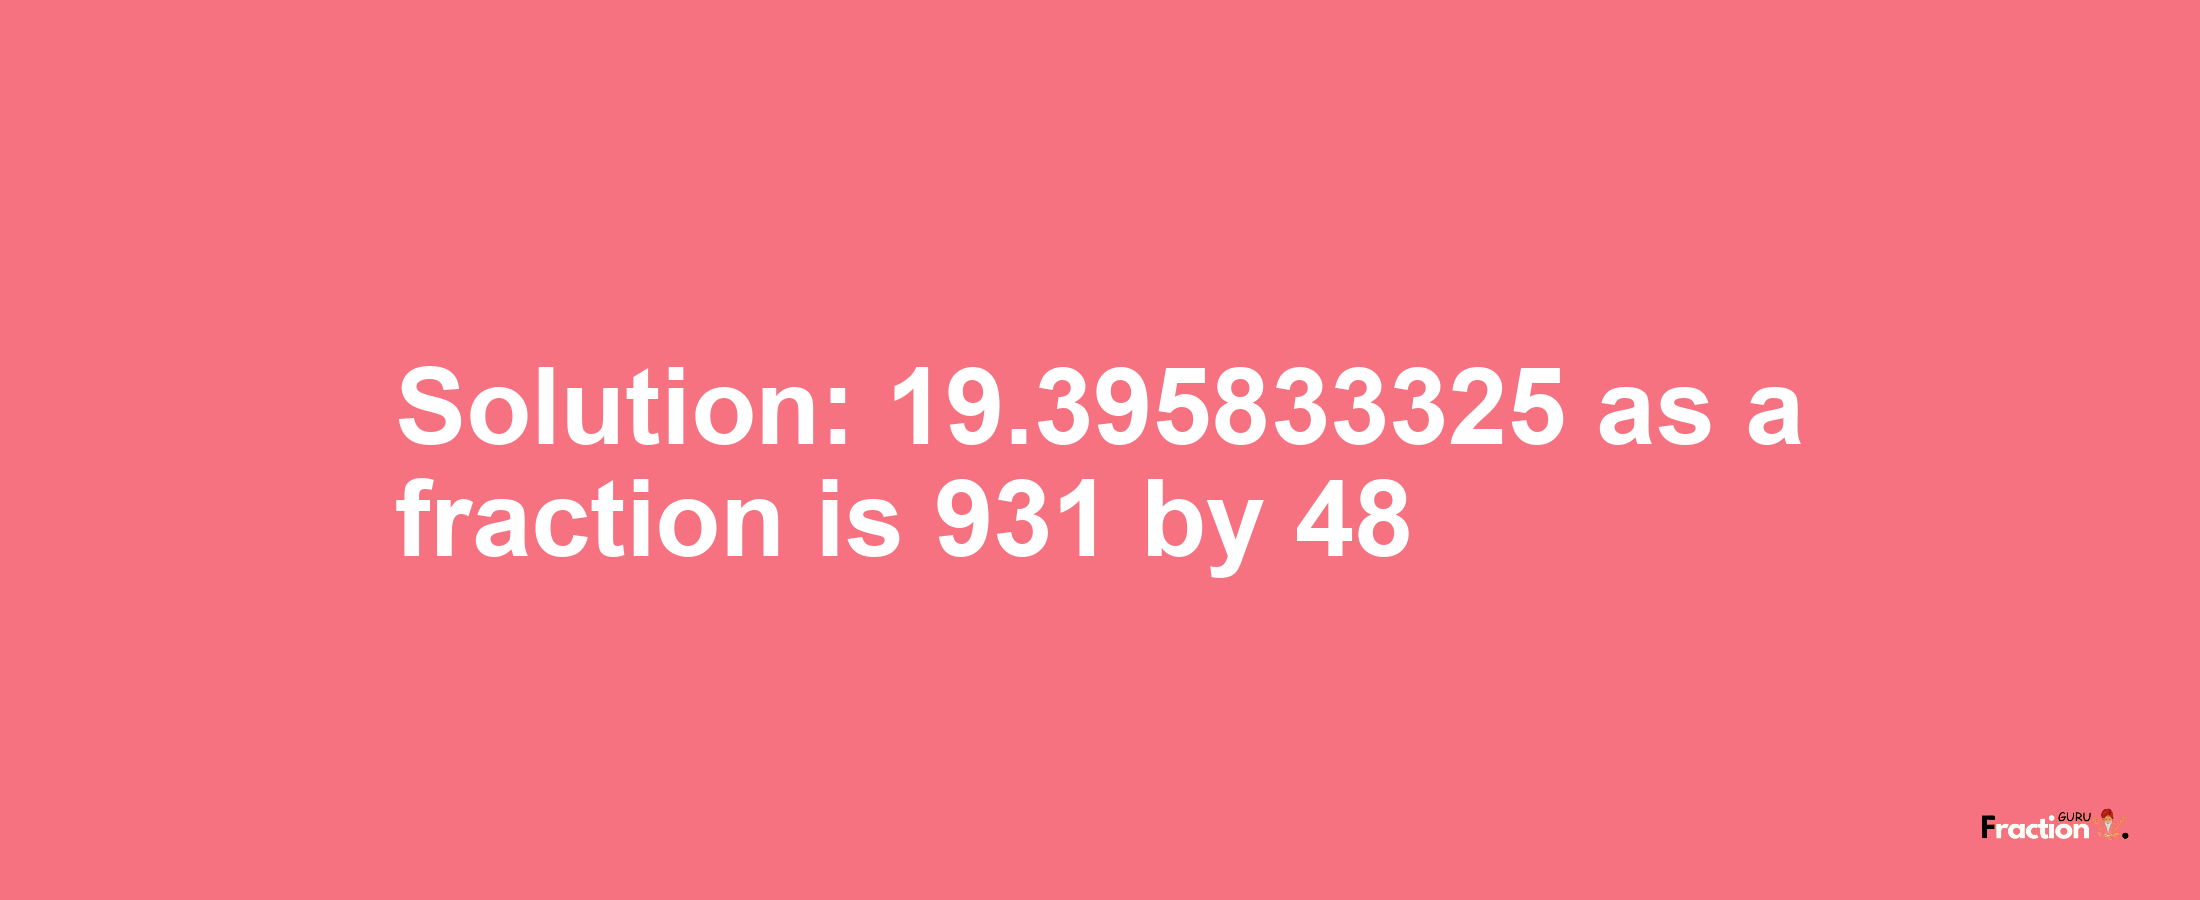 Solution:19.395833325 as a fraction is 931/48